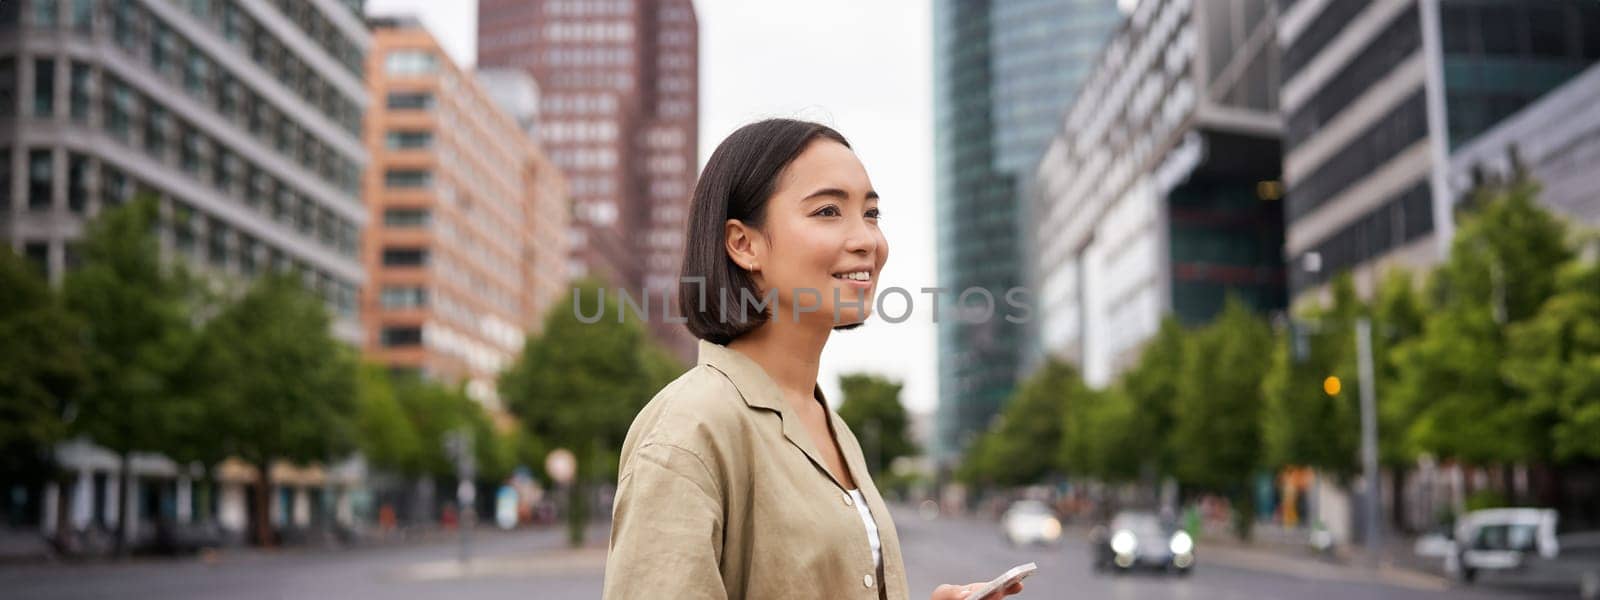 Young asian woman exploring city with smartphone app, holding mobile phone and walking on screet.